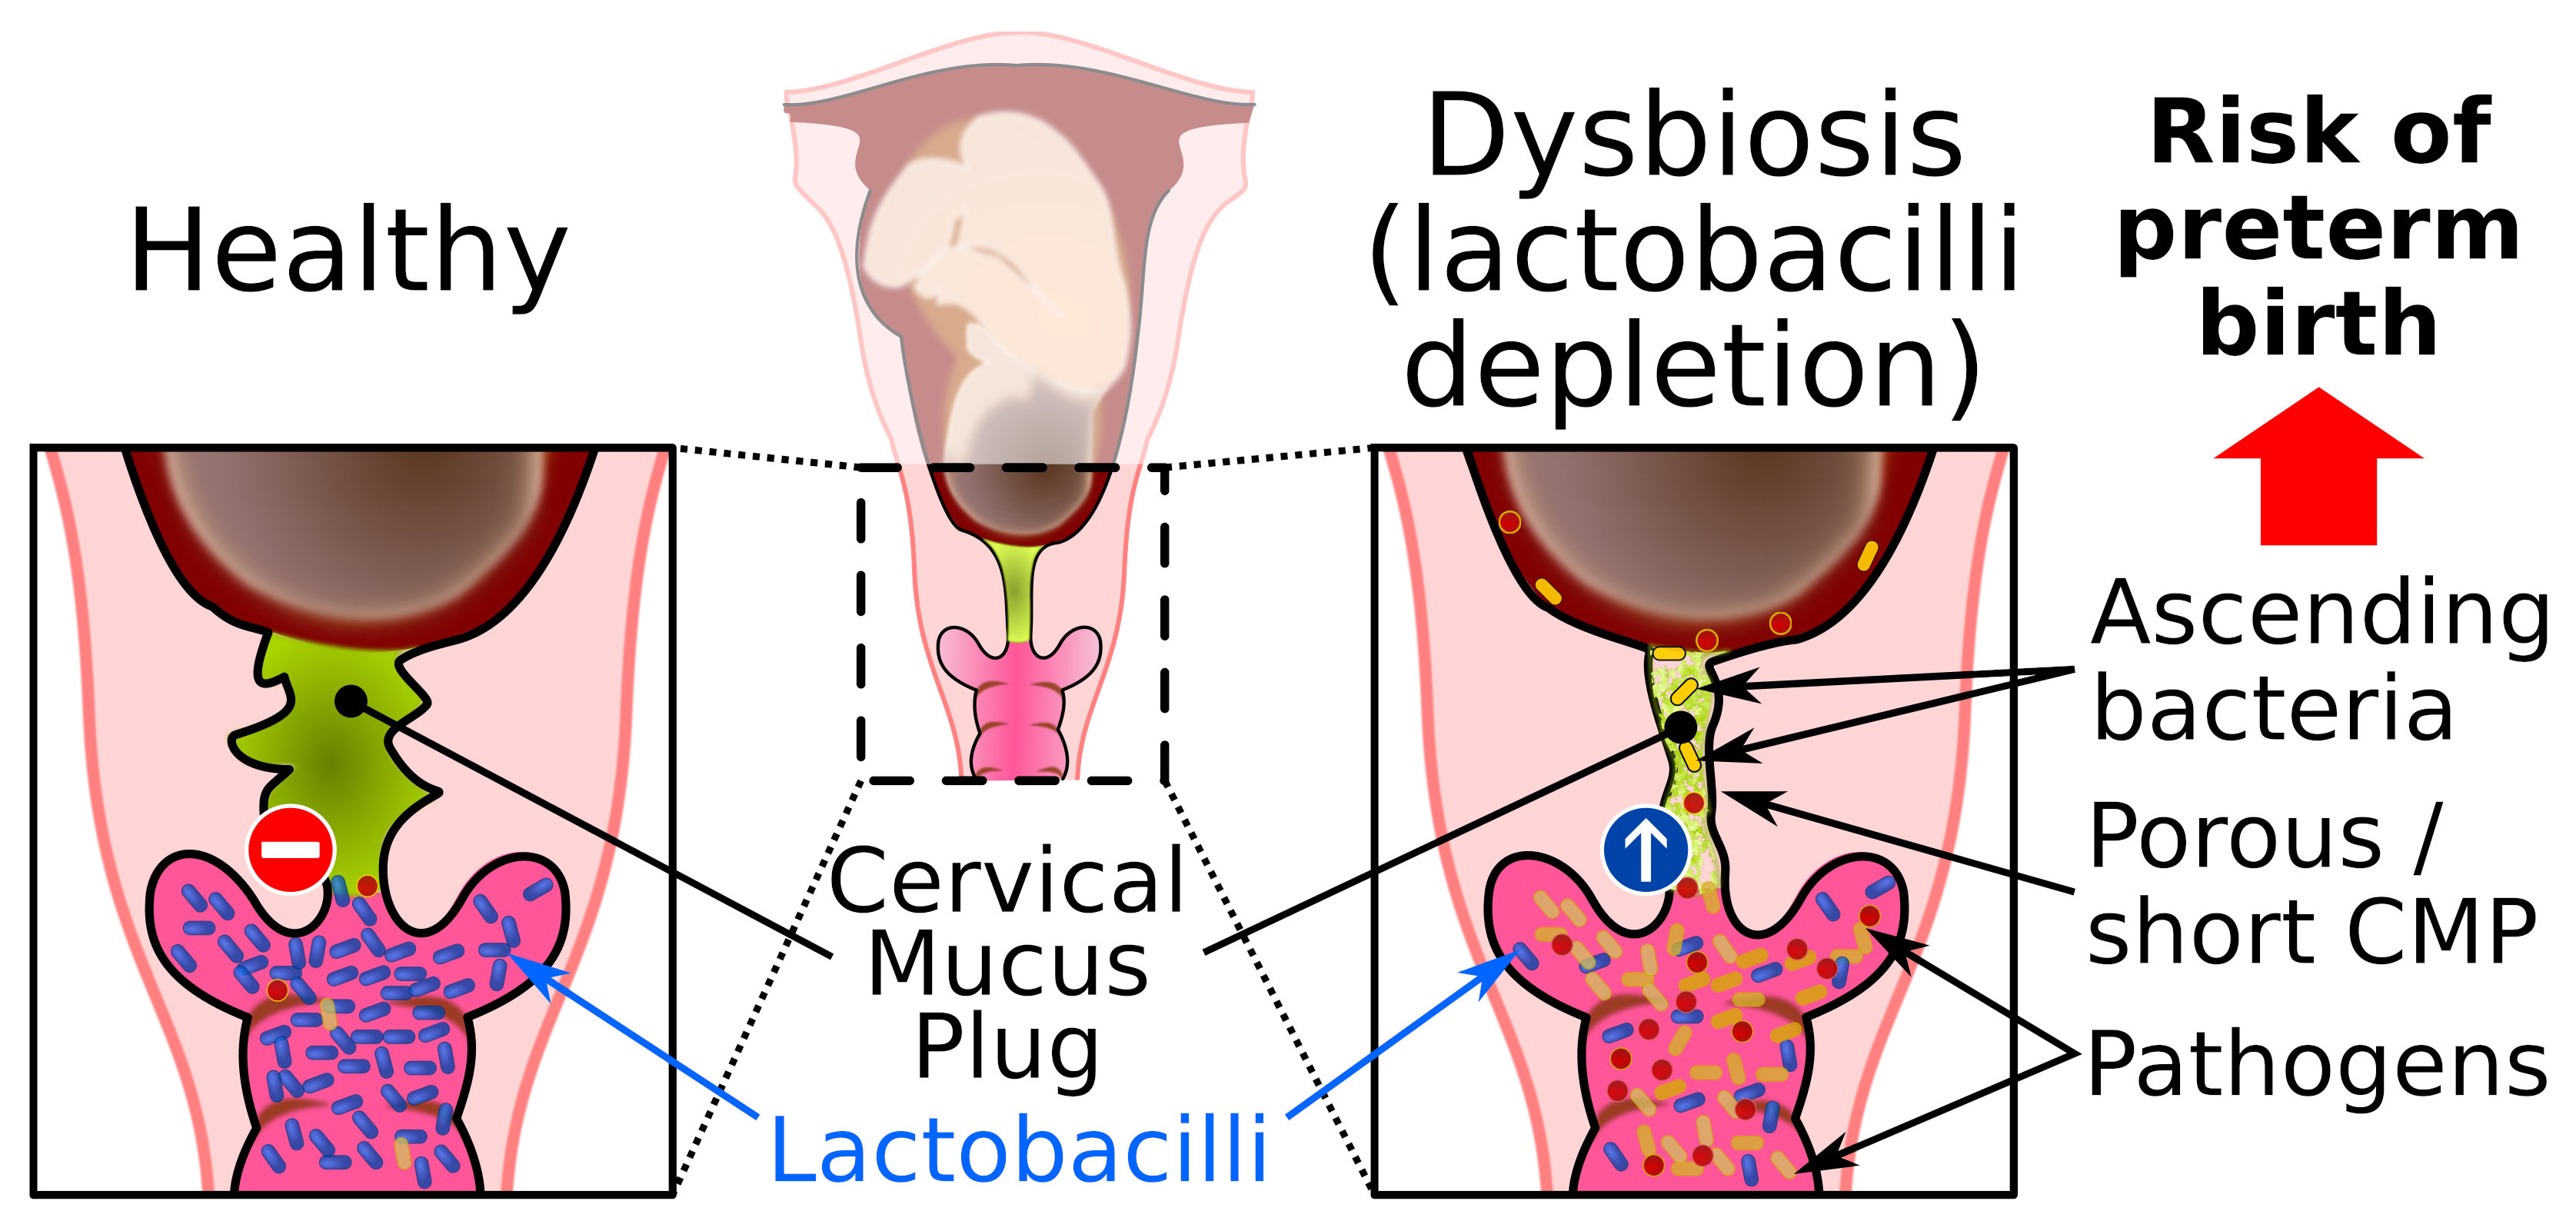 Photographs showing vaginal mucus discharges assessed according